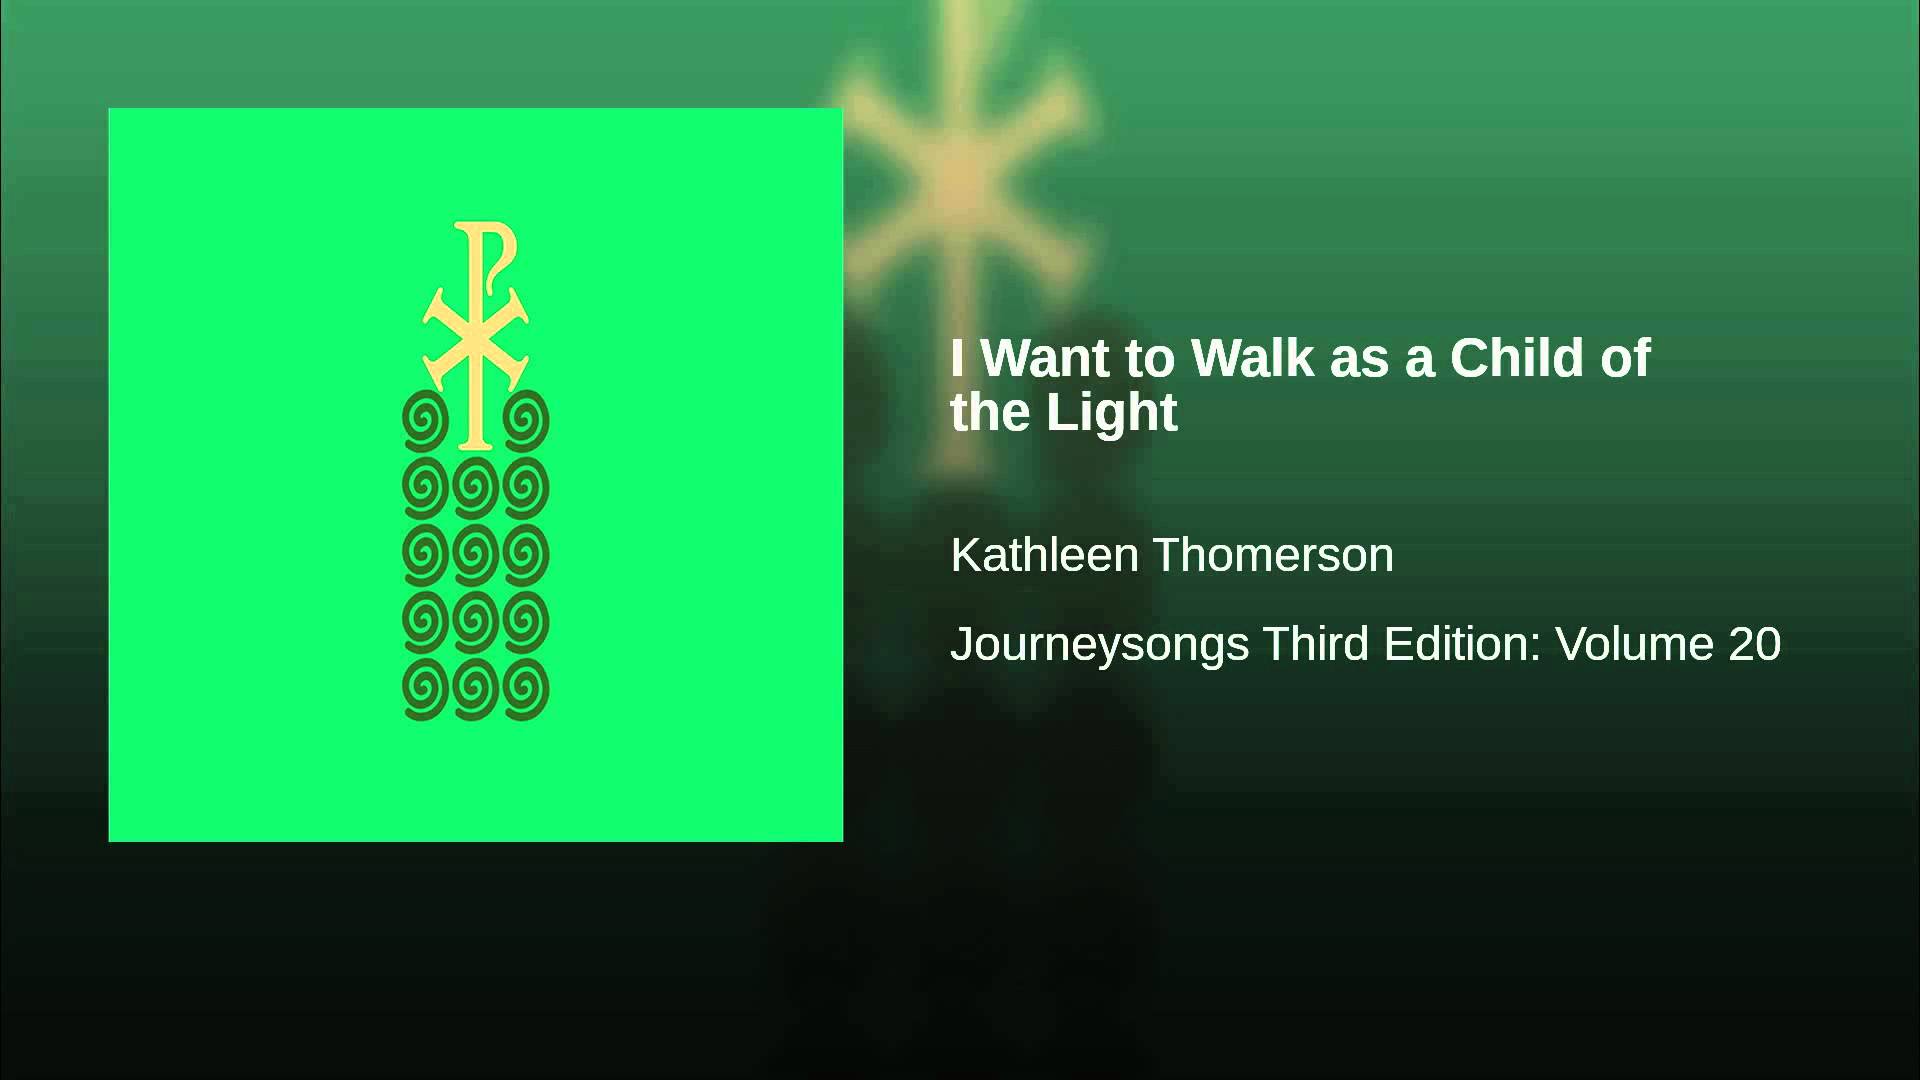 Art for I Want to Walk as a Child of the Light by Kathleen Thomerson